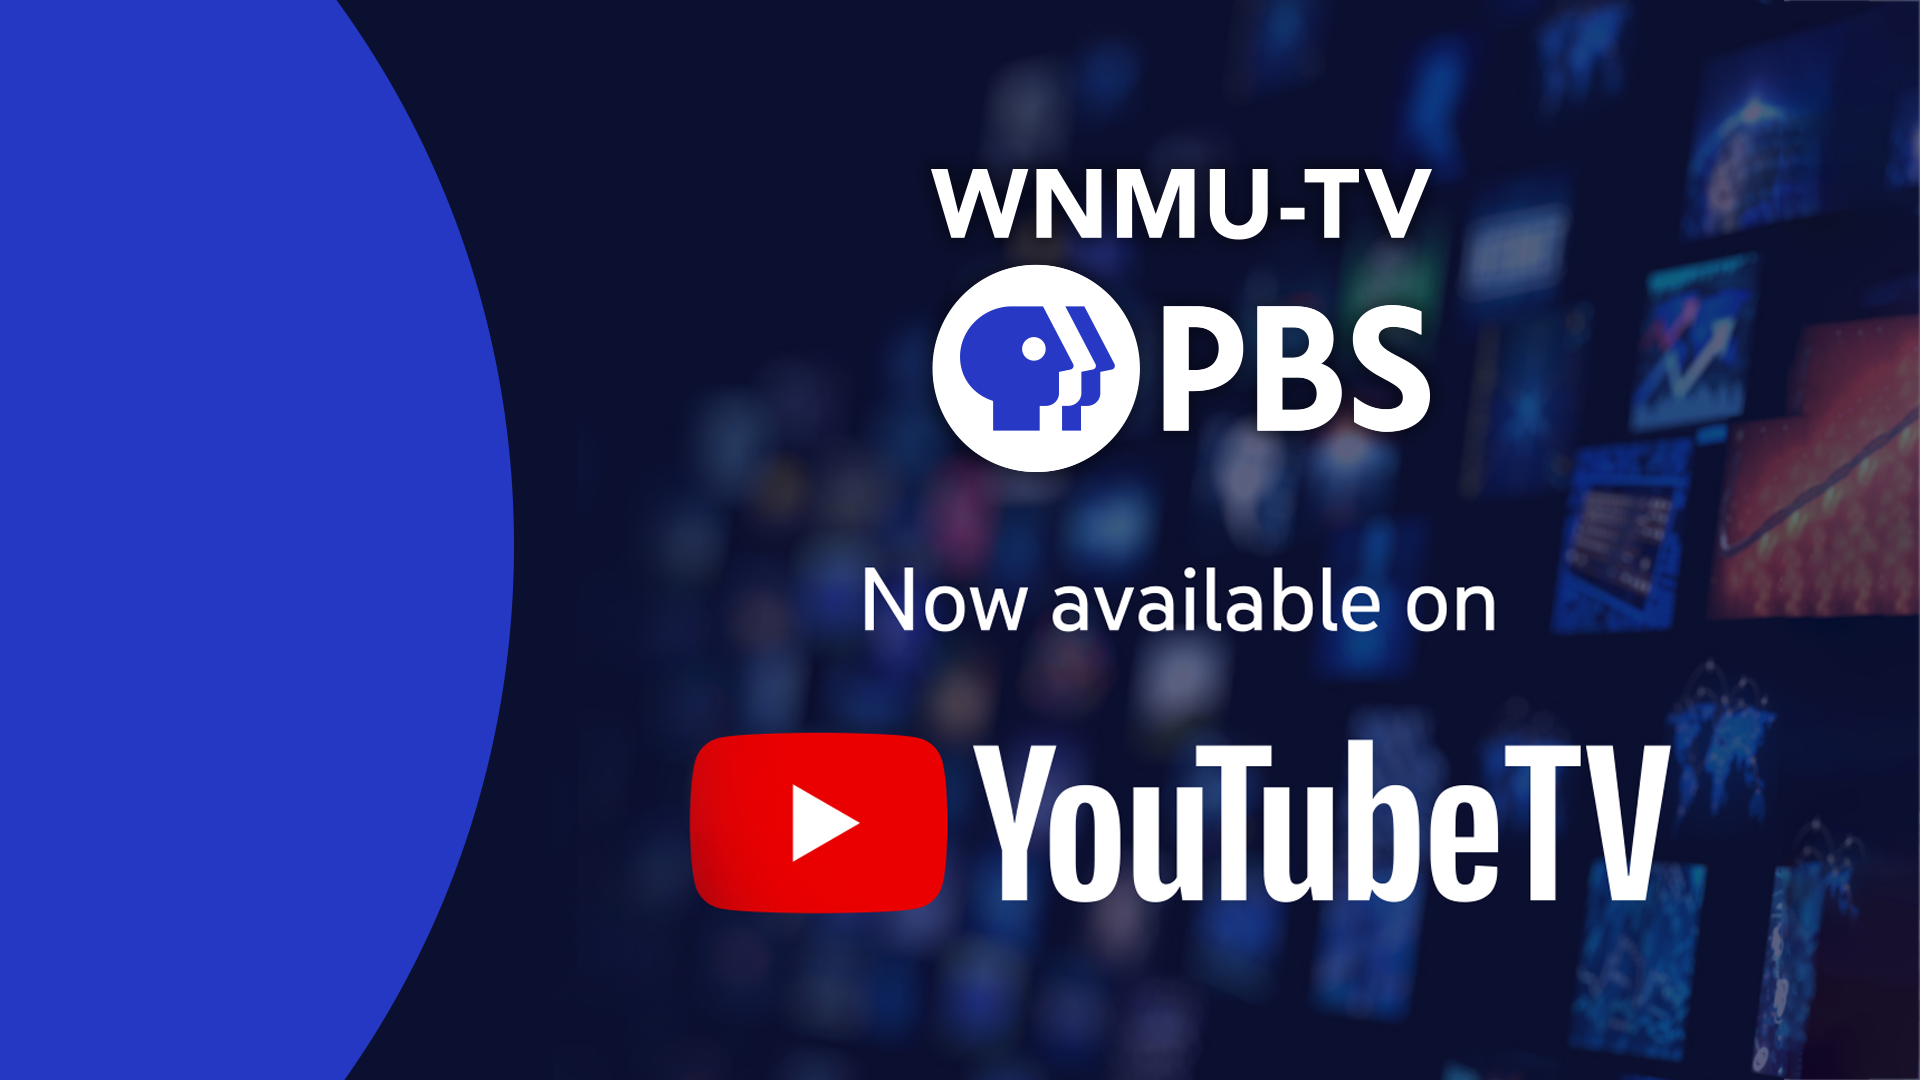 WNMU-TV Now Available on Youtube TV